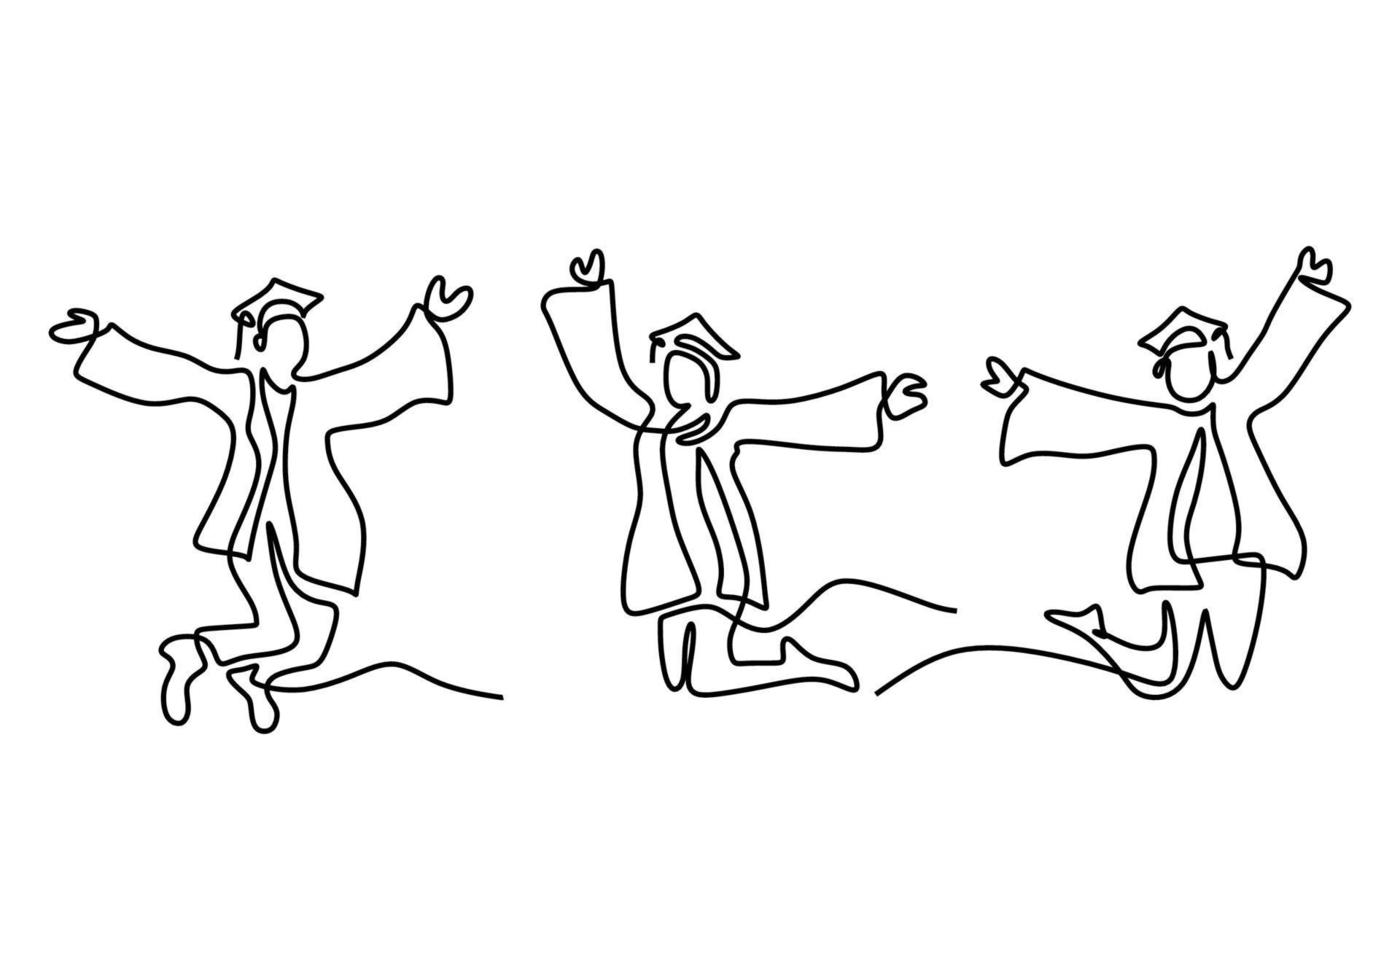 One continuous line group young students in jump joyfully. Happy three teenager student express their graduation while hands up isolated on white background. The concept of graduation celebration vector